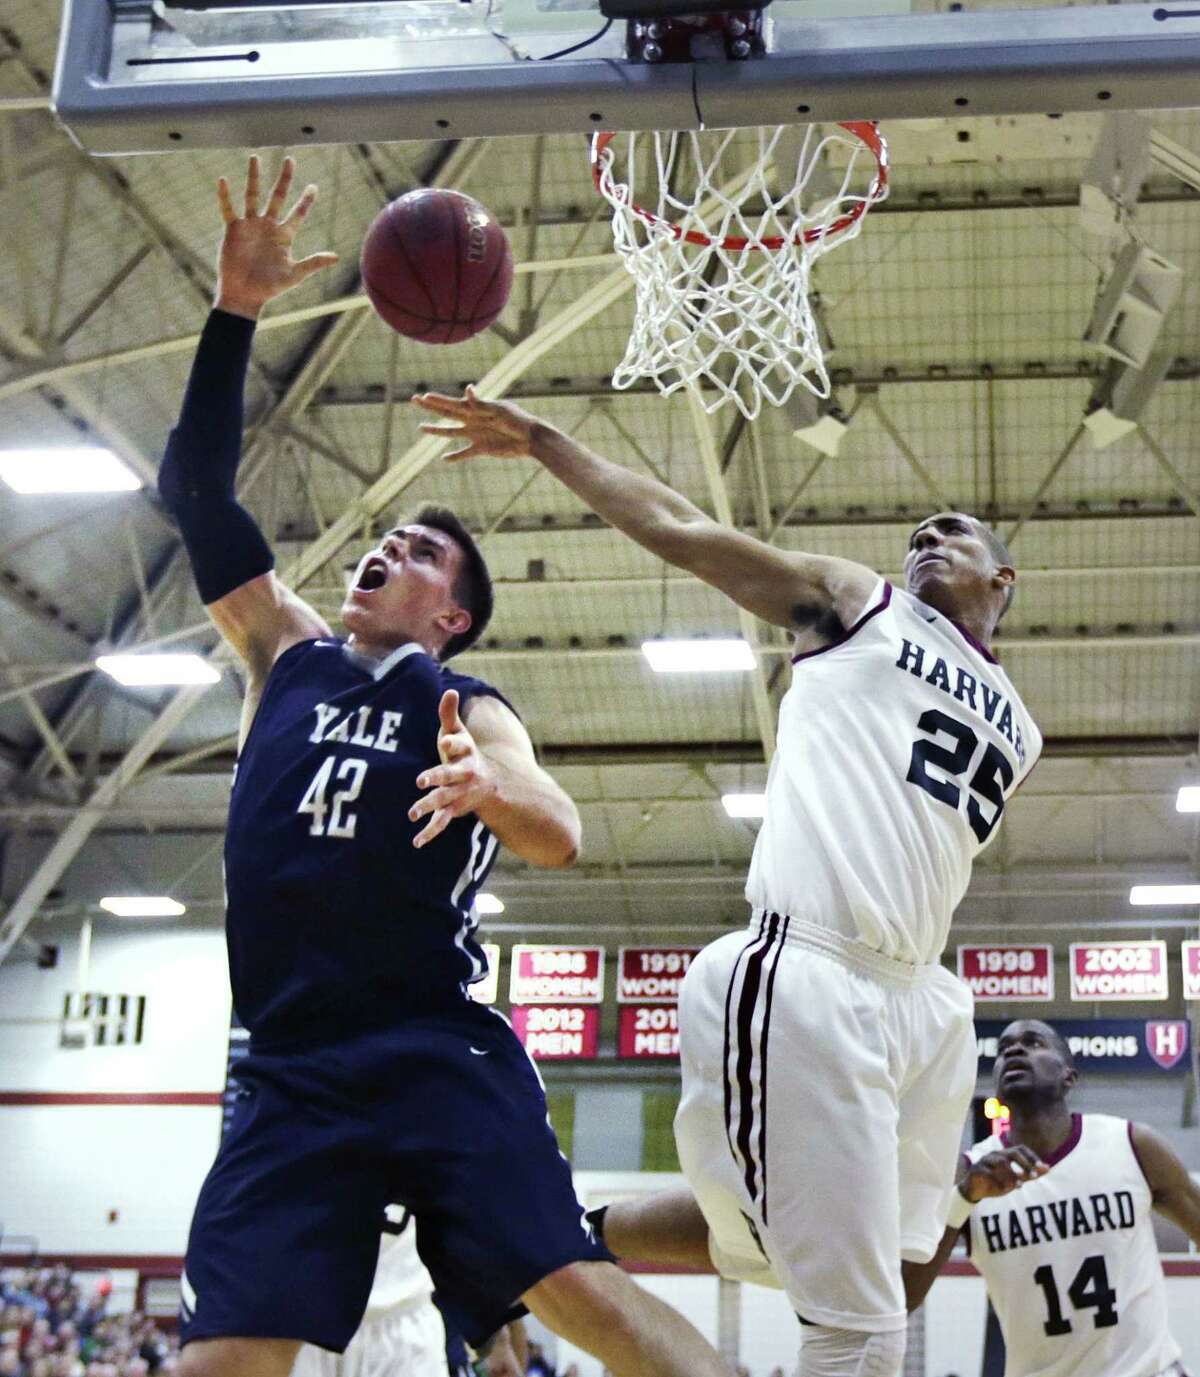 Harvard center Kenyatta Smith (25) blocks a shot by Yale’s Matt Townsend during the first half of their game on March 6.